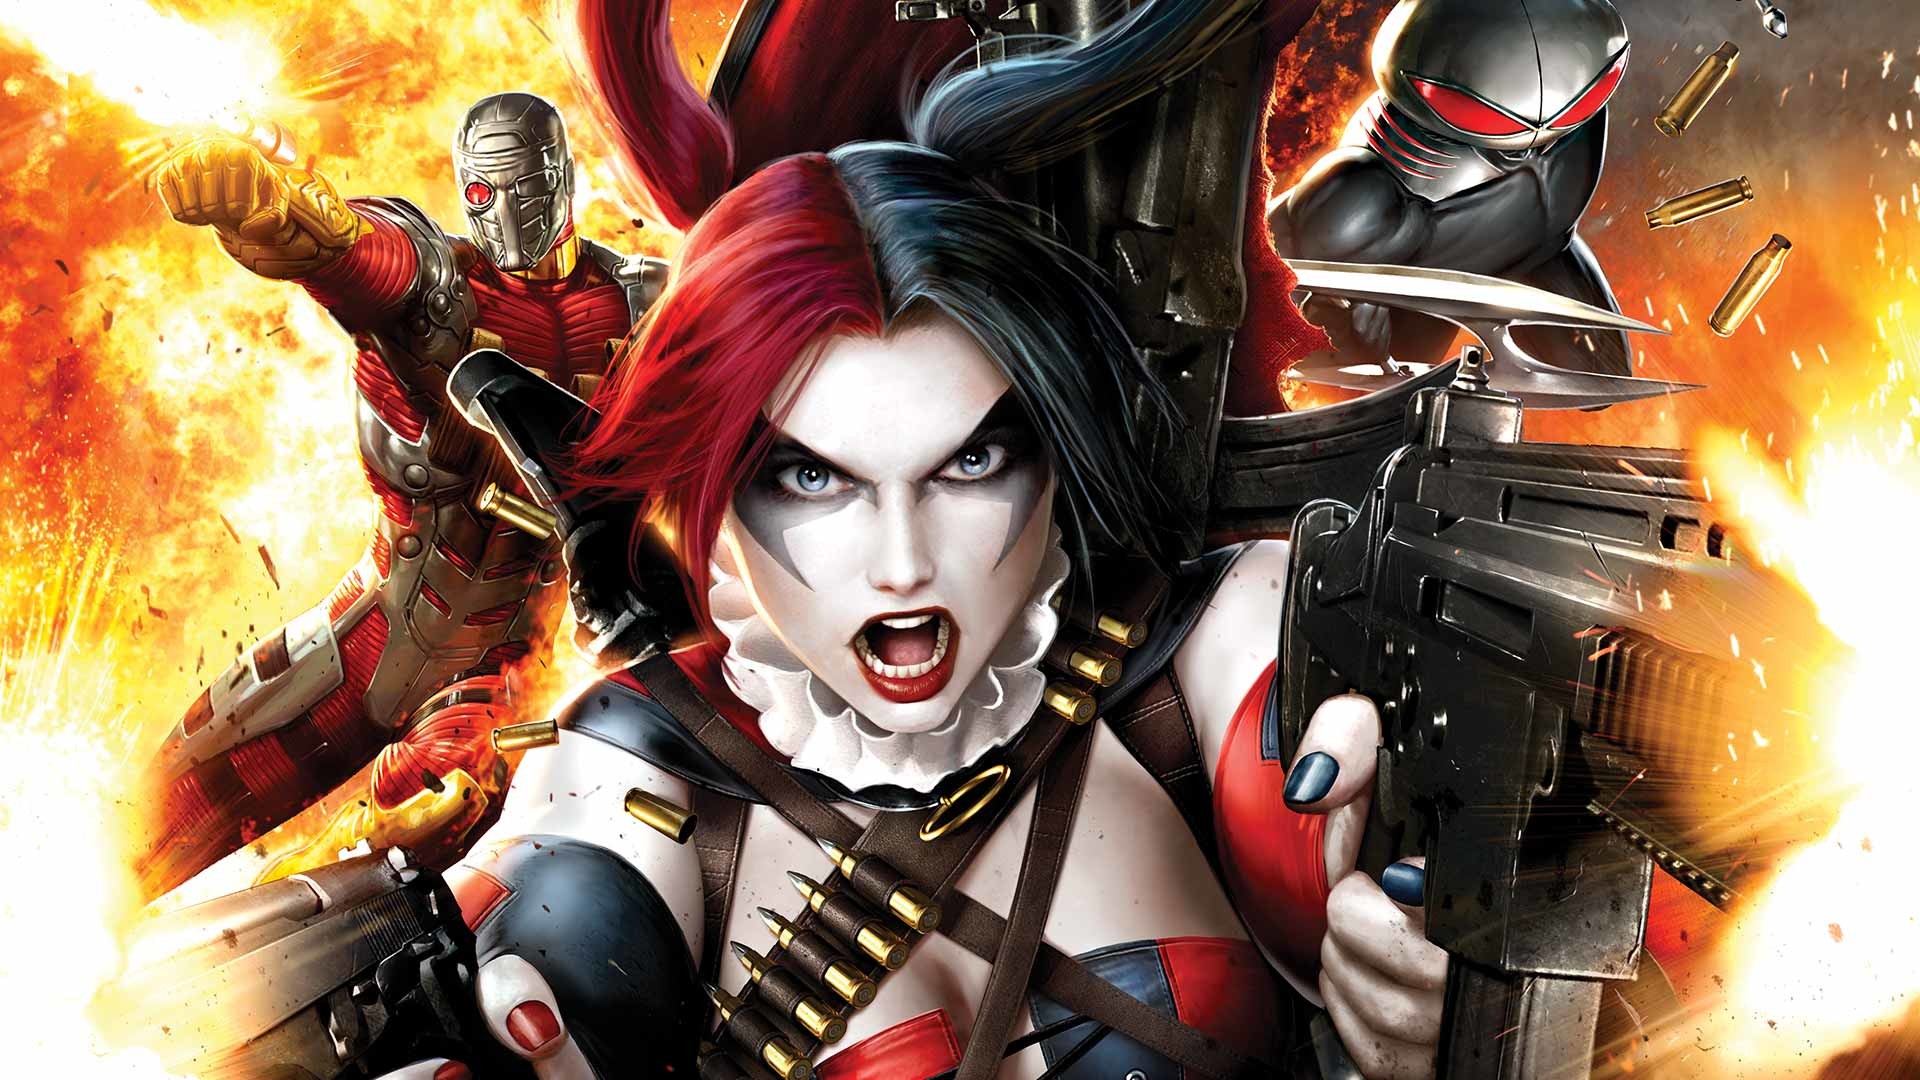 1920x1080 Suicide Squad creator shares thoughts on movie casting - Batman News